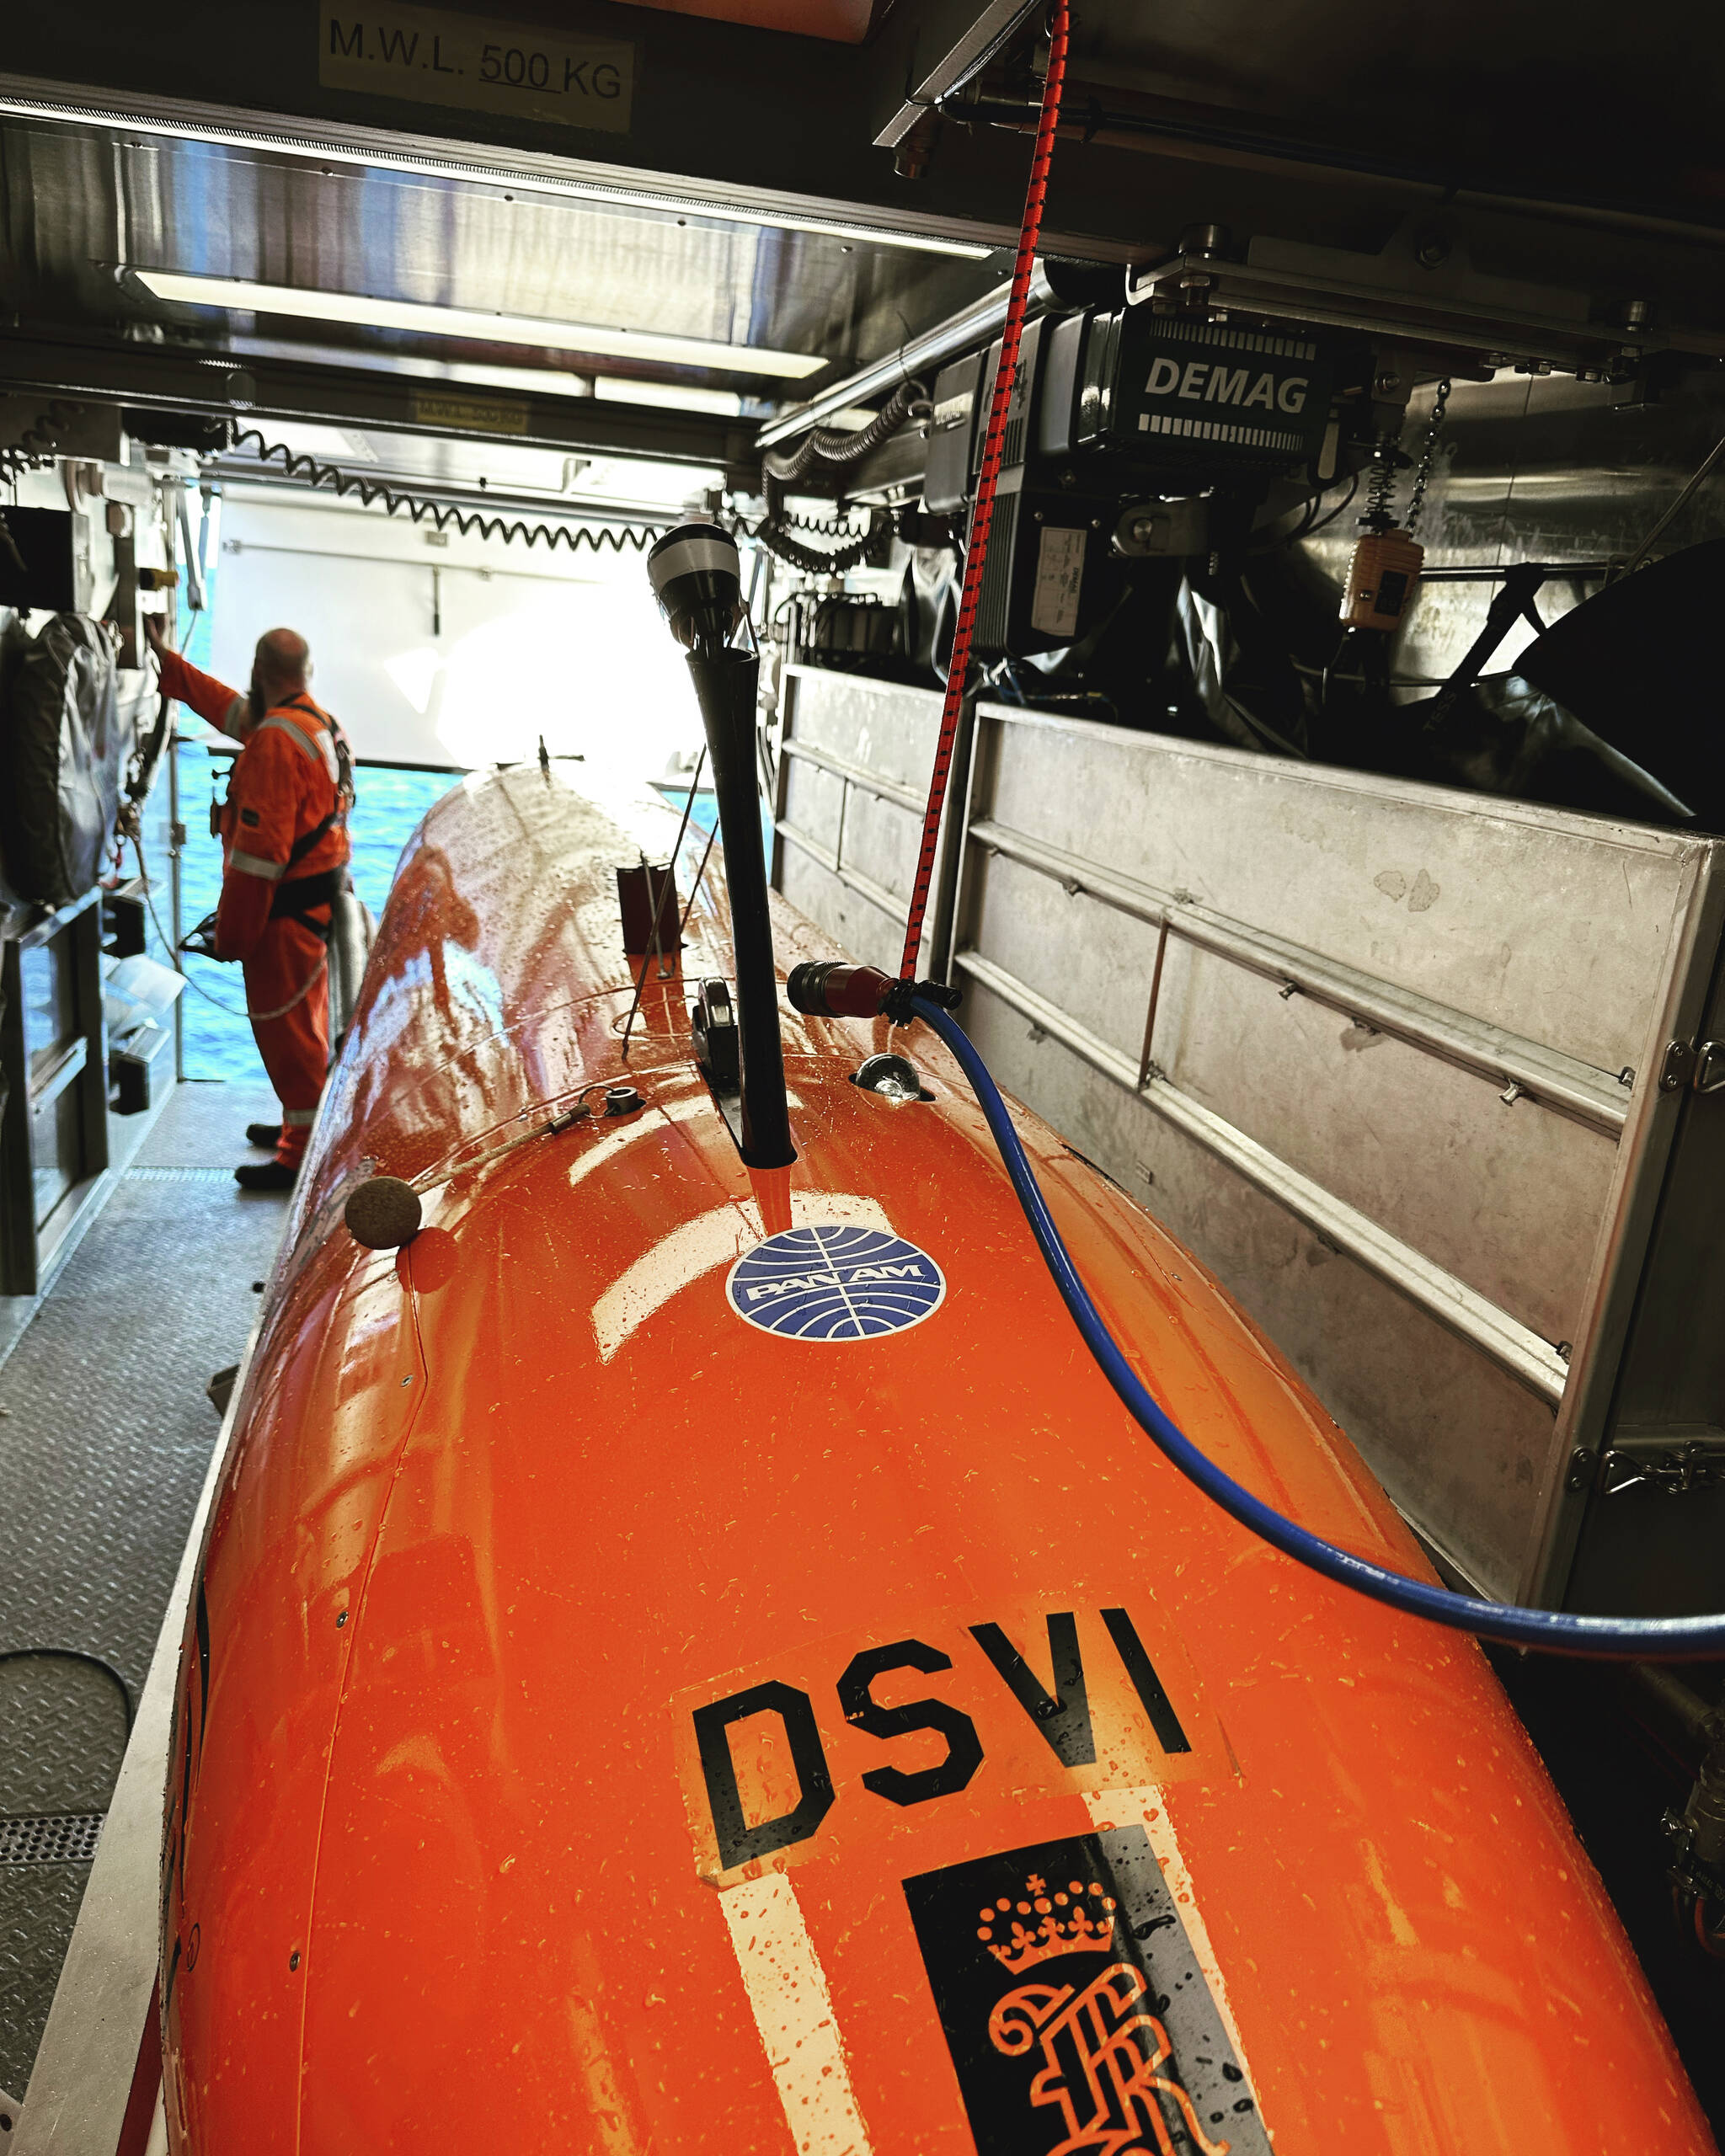 The HUGIN 6000 AUV is the sonar system Romeo used for scanning the sea floor. “The Pan Am sticker on the equipment is for my dad and Amelia’s navigator Fred Noonan who also flew for Pan Am,” Romeo shared.